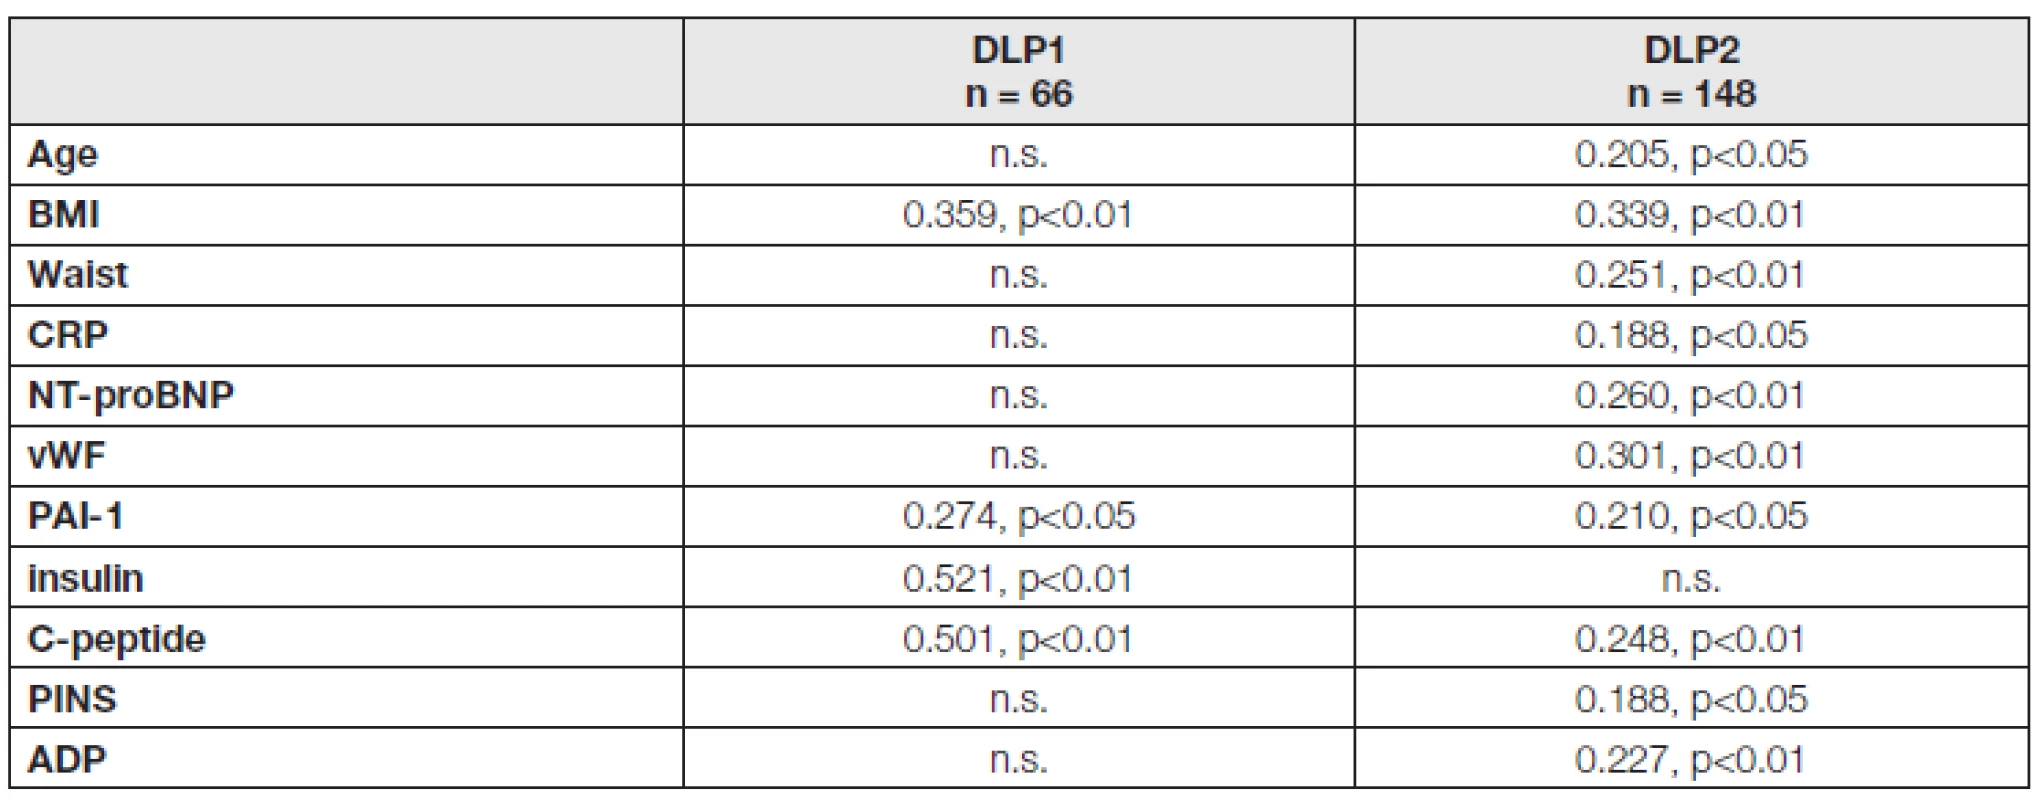 Significant correlations of A-FABP with other parameters in DLP1 and DLP2 groups (r and p values)